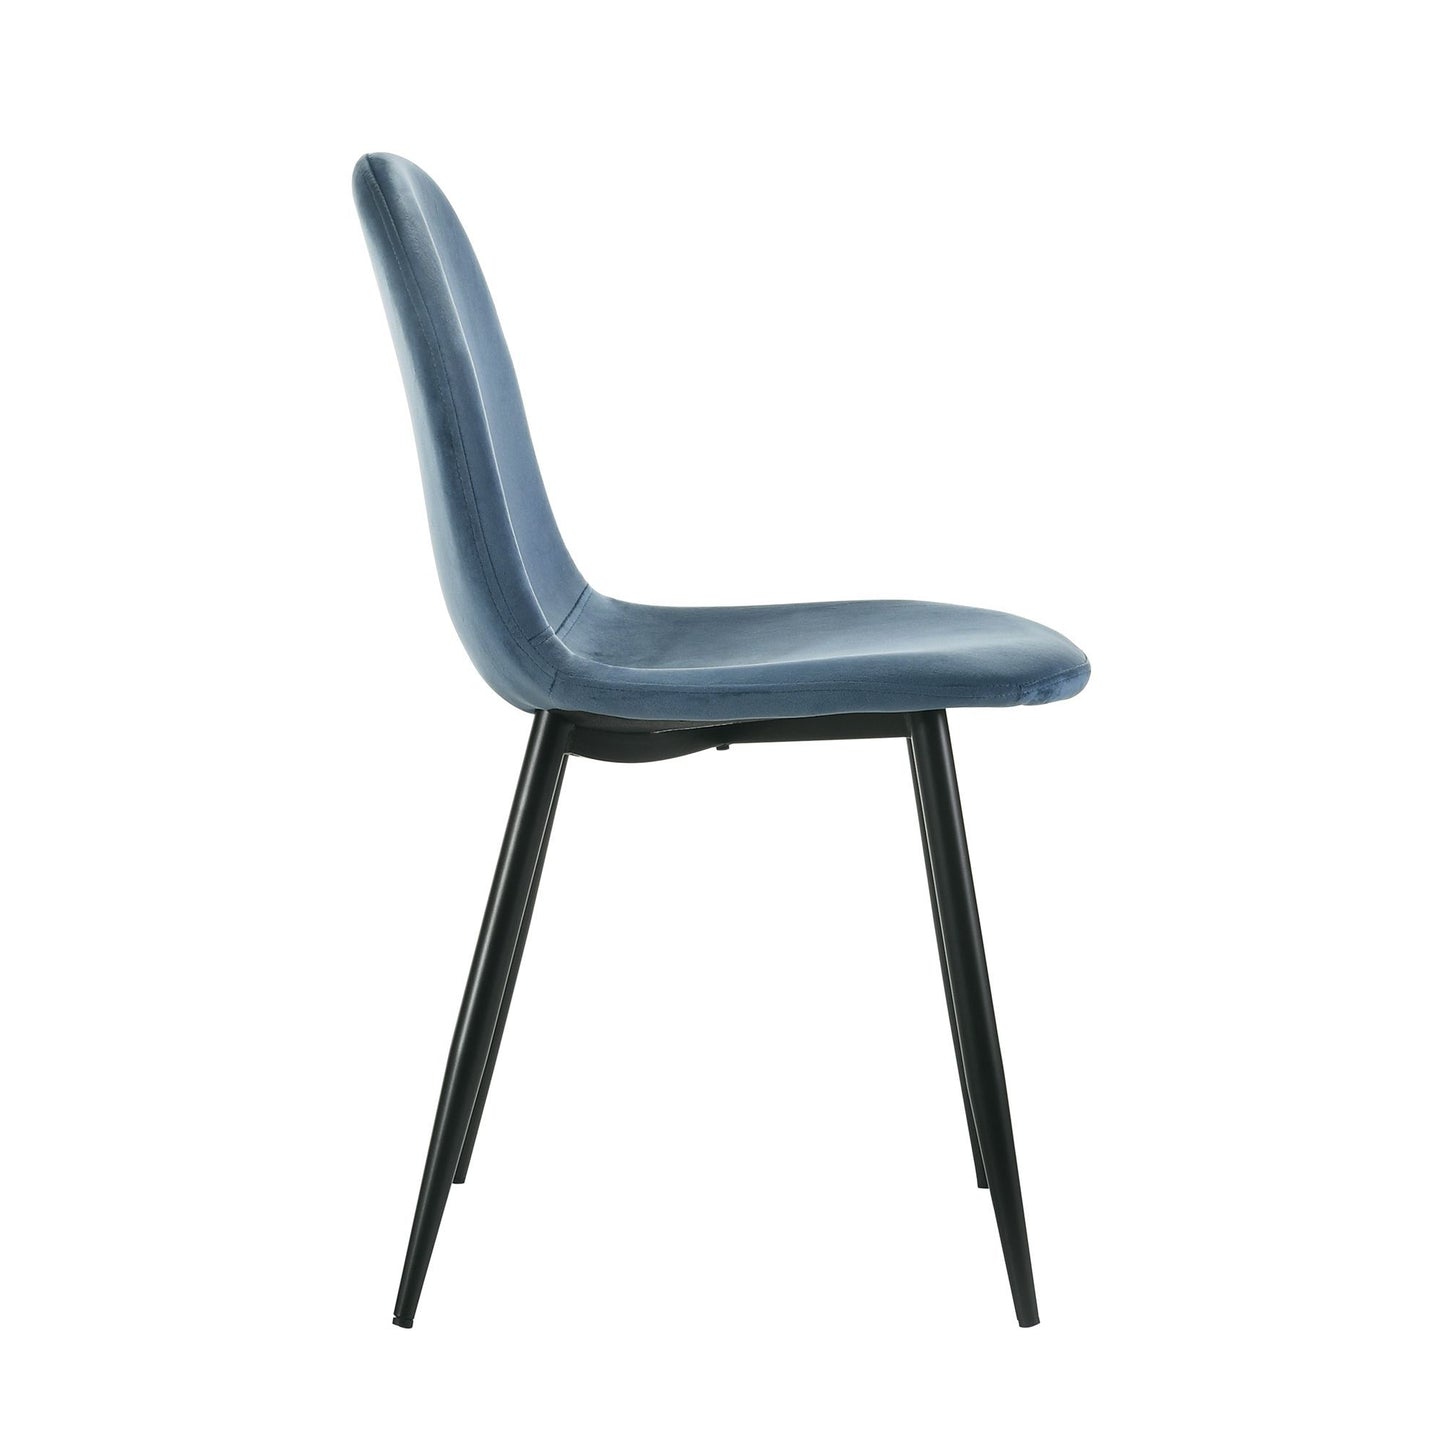 Isadora - Side Chair (Set of 2)